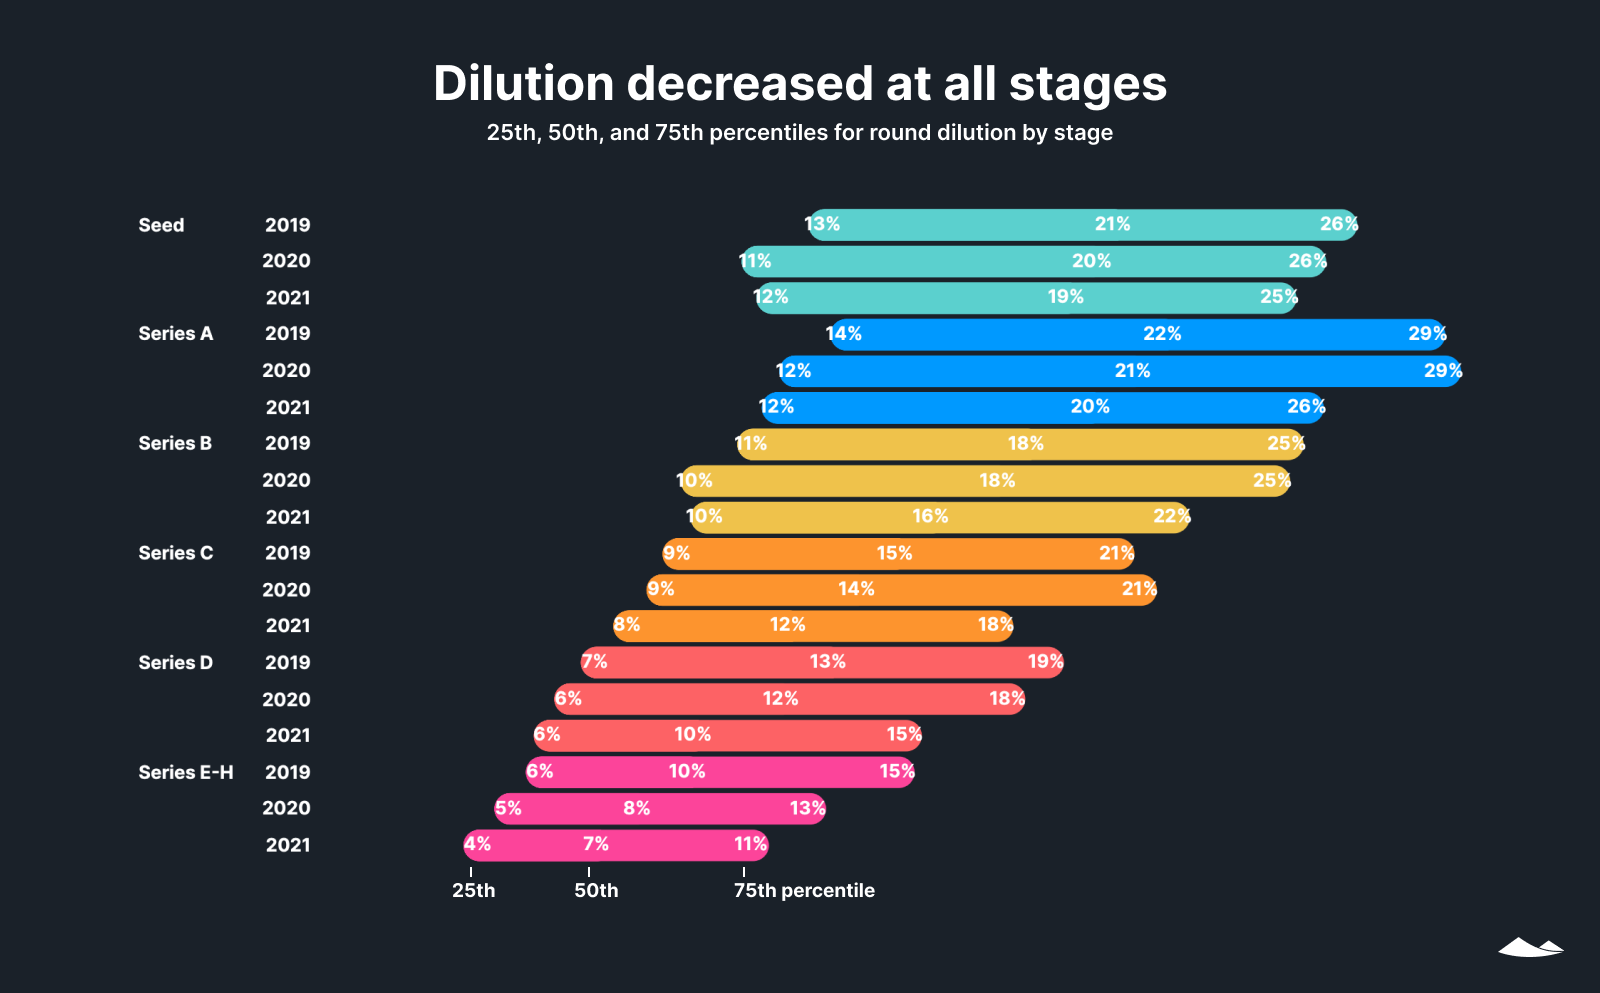 Dilution decreased at all stages